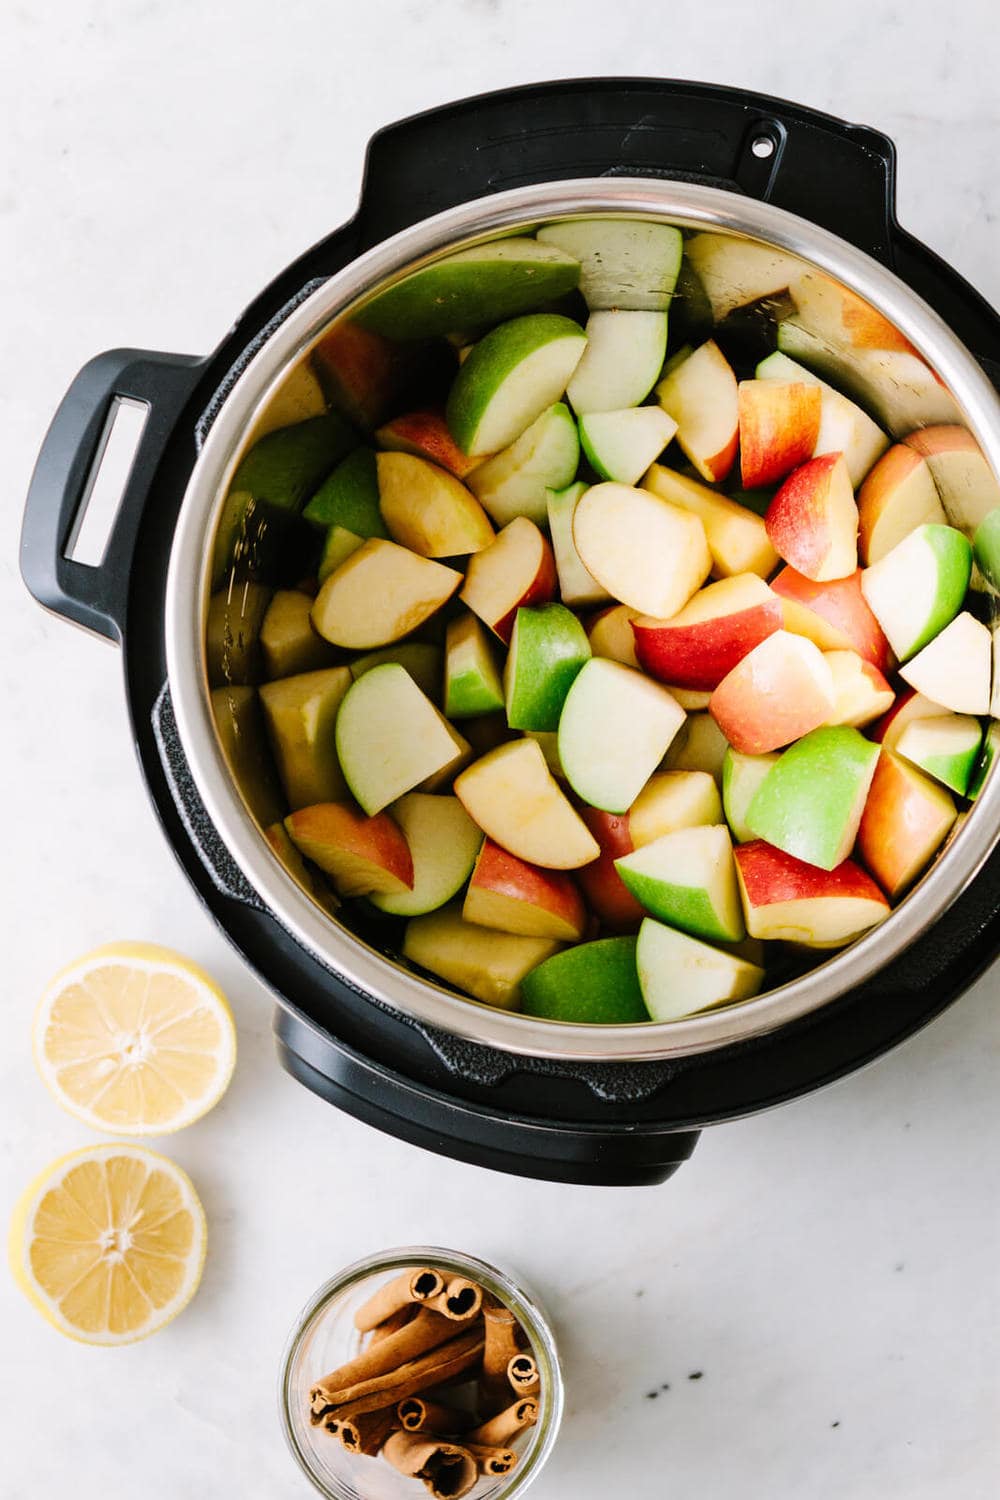 mix of granny smith, fuji and honey crisp apples with skins in an instant pot